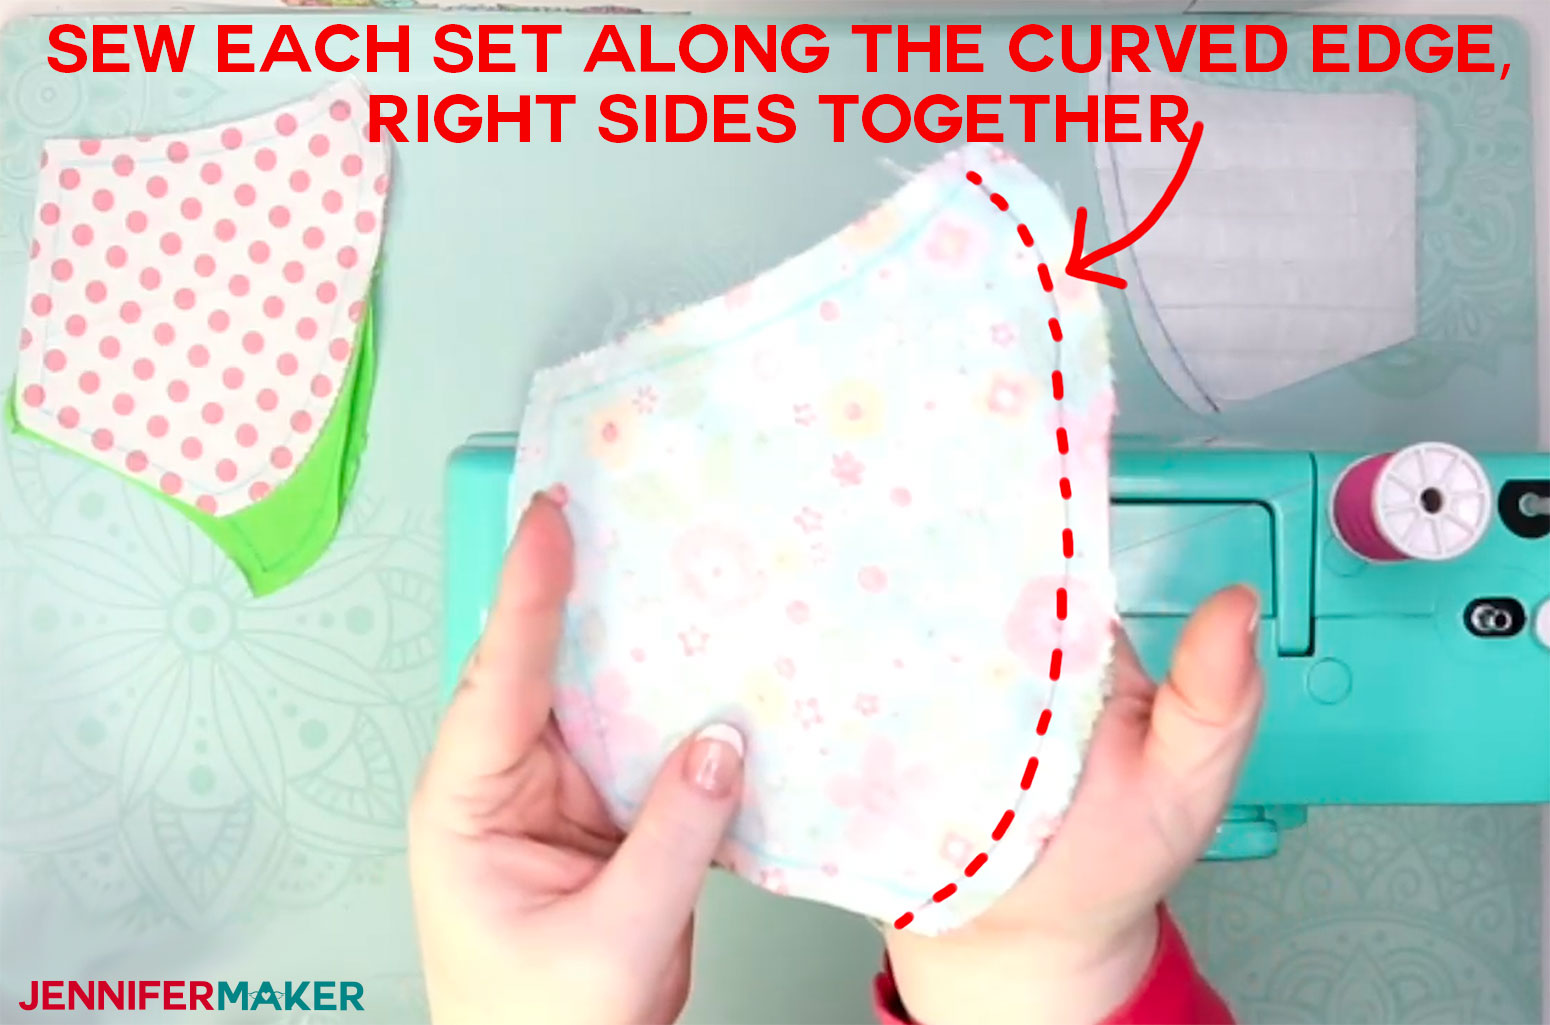 Sew each face mask piece set along the curved edge, right sides togther